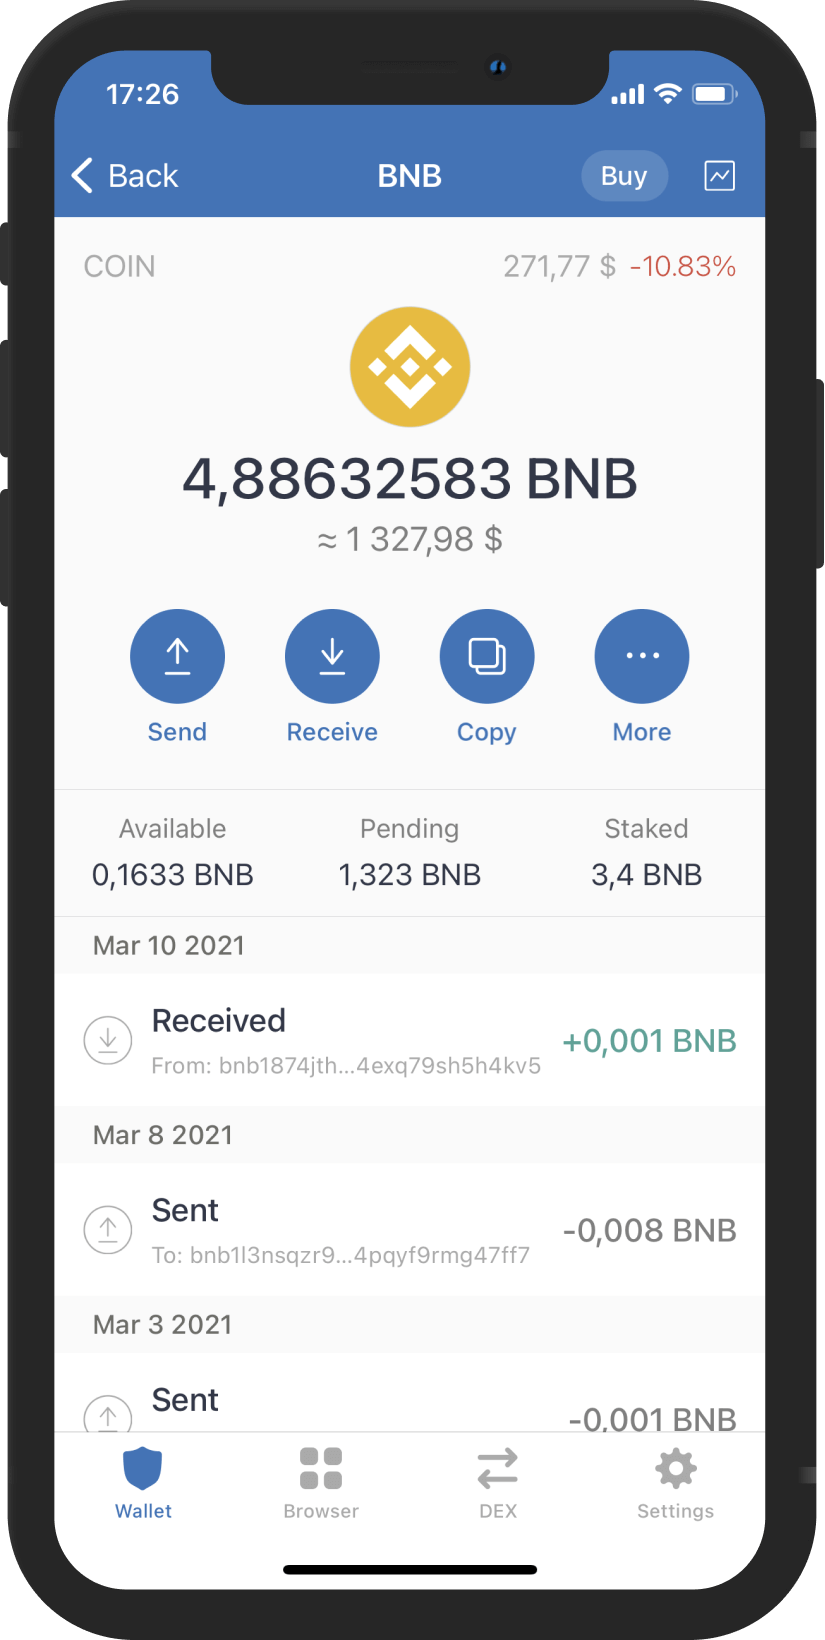 Shows a mockup how binance looks like in the trust wallet interface